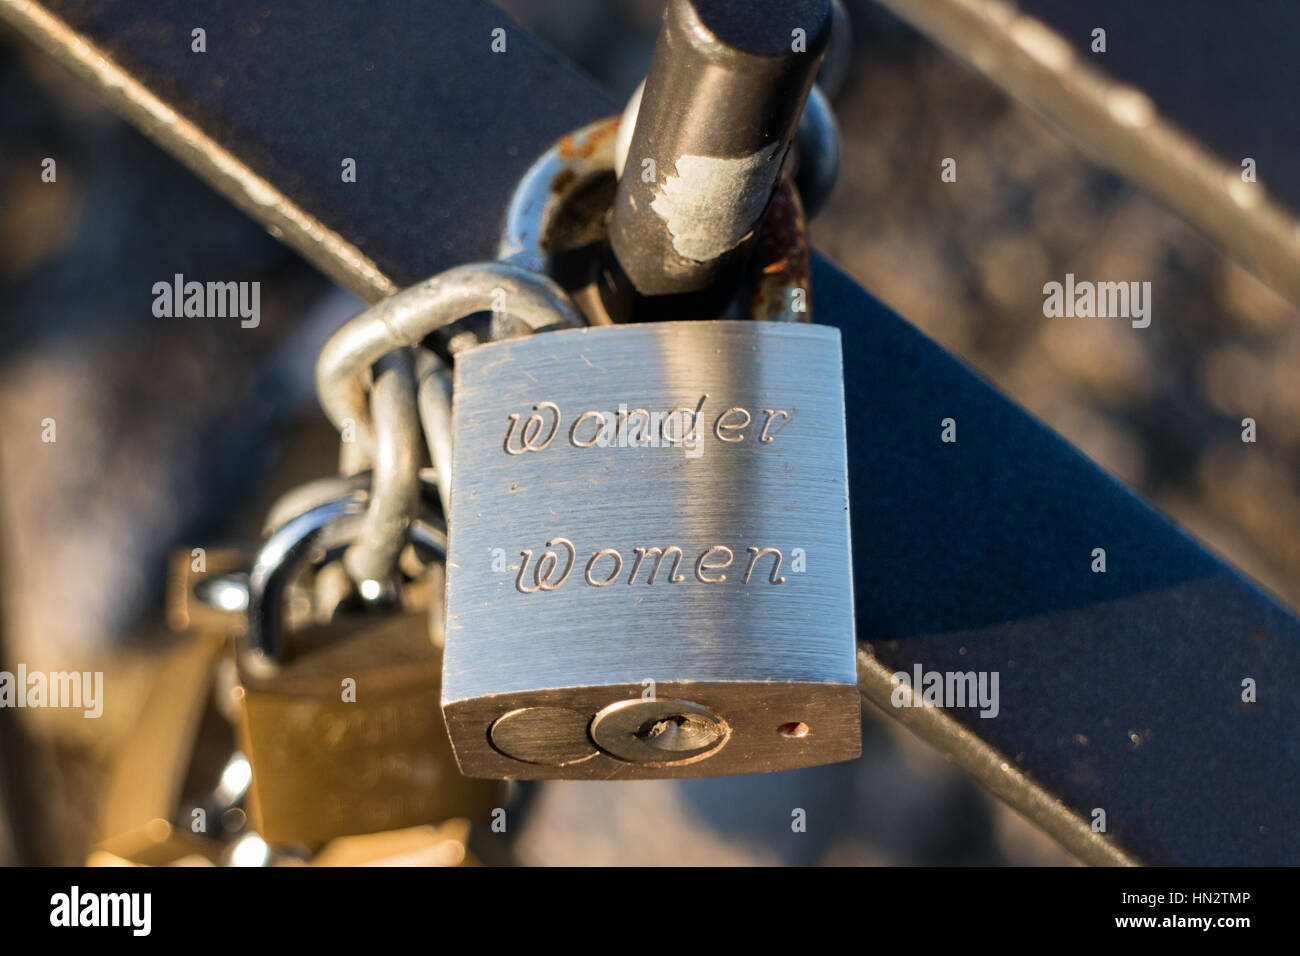 A padlock attached to railings with Wonder Women engraved Stock Photo